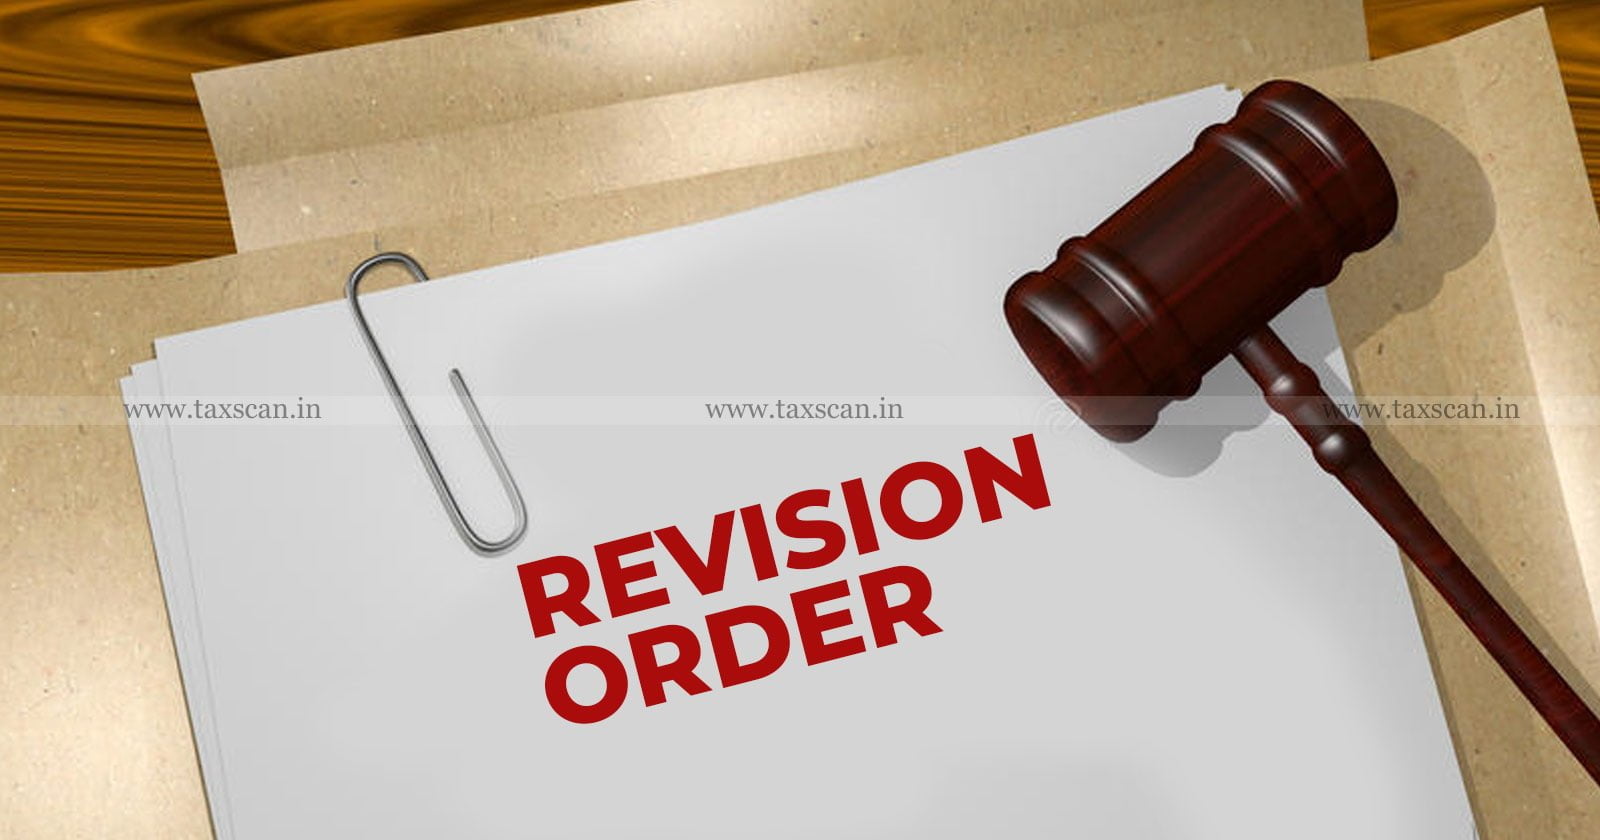 Disallowance - income tax act - revision order - ITAT - taxscan